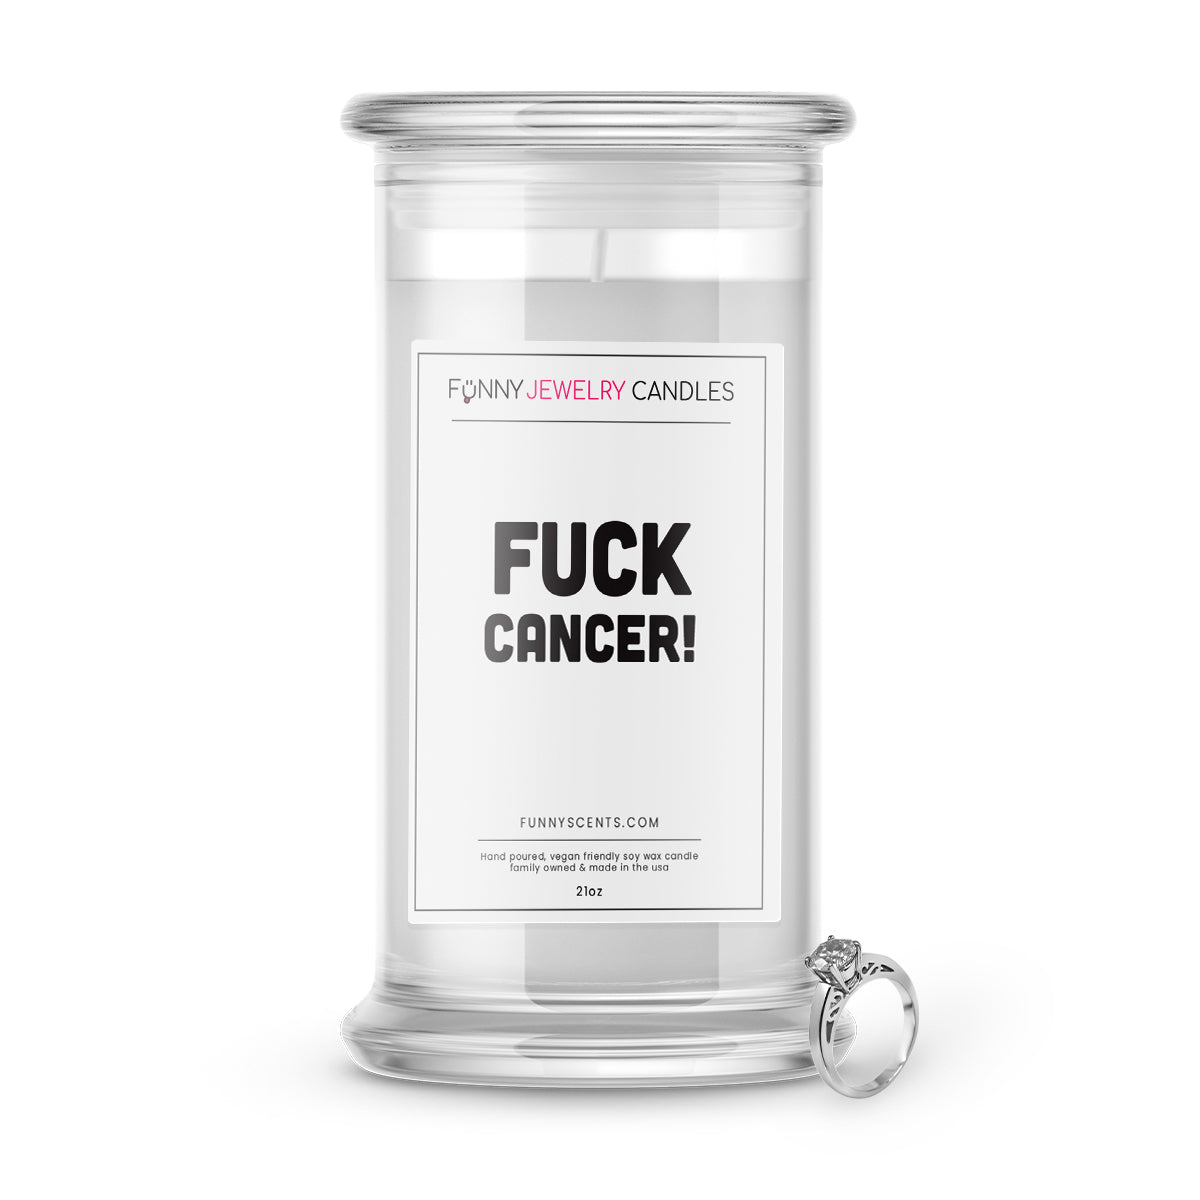 Fuck Cancer! Jewelry Funny Candles